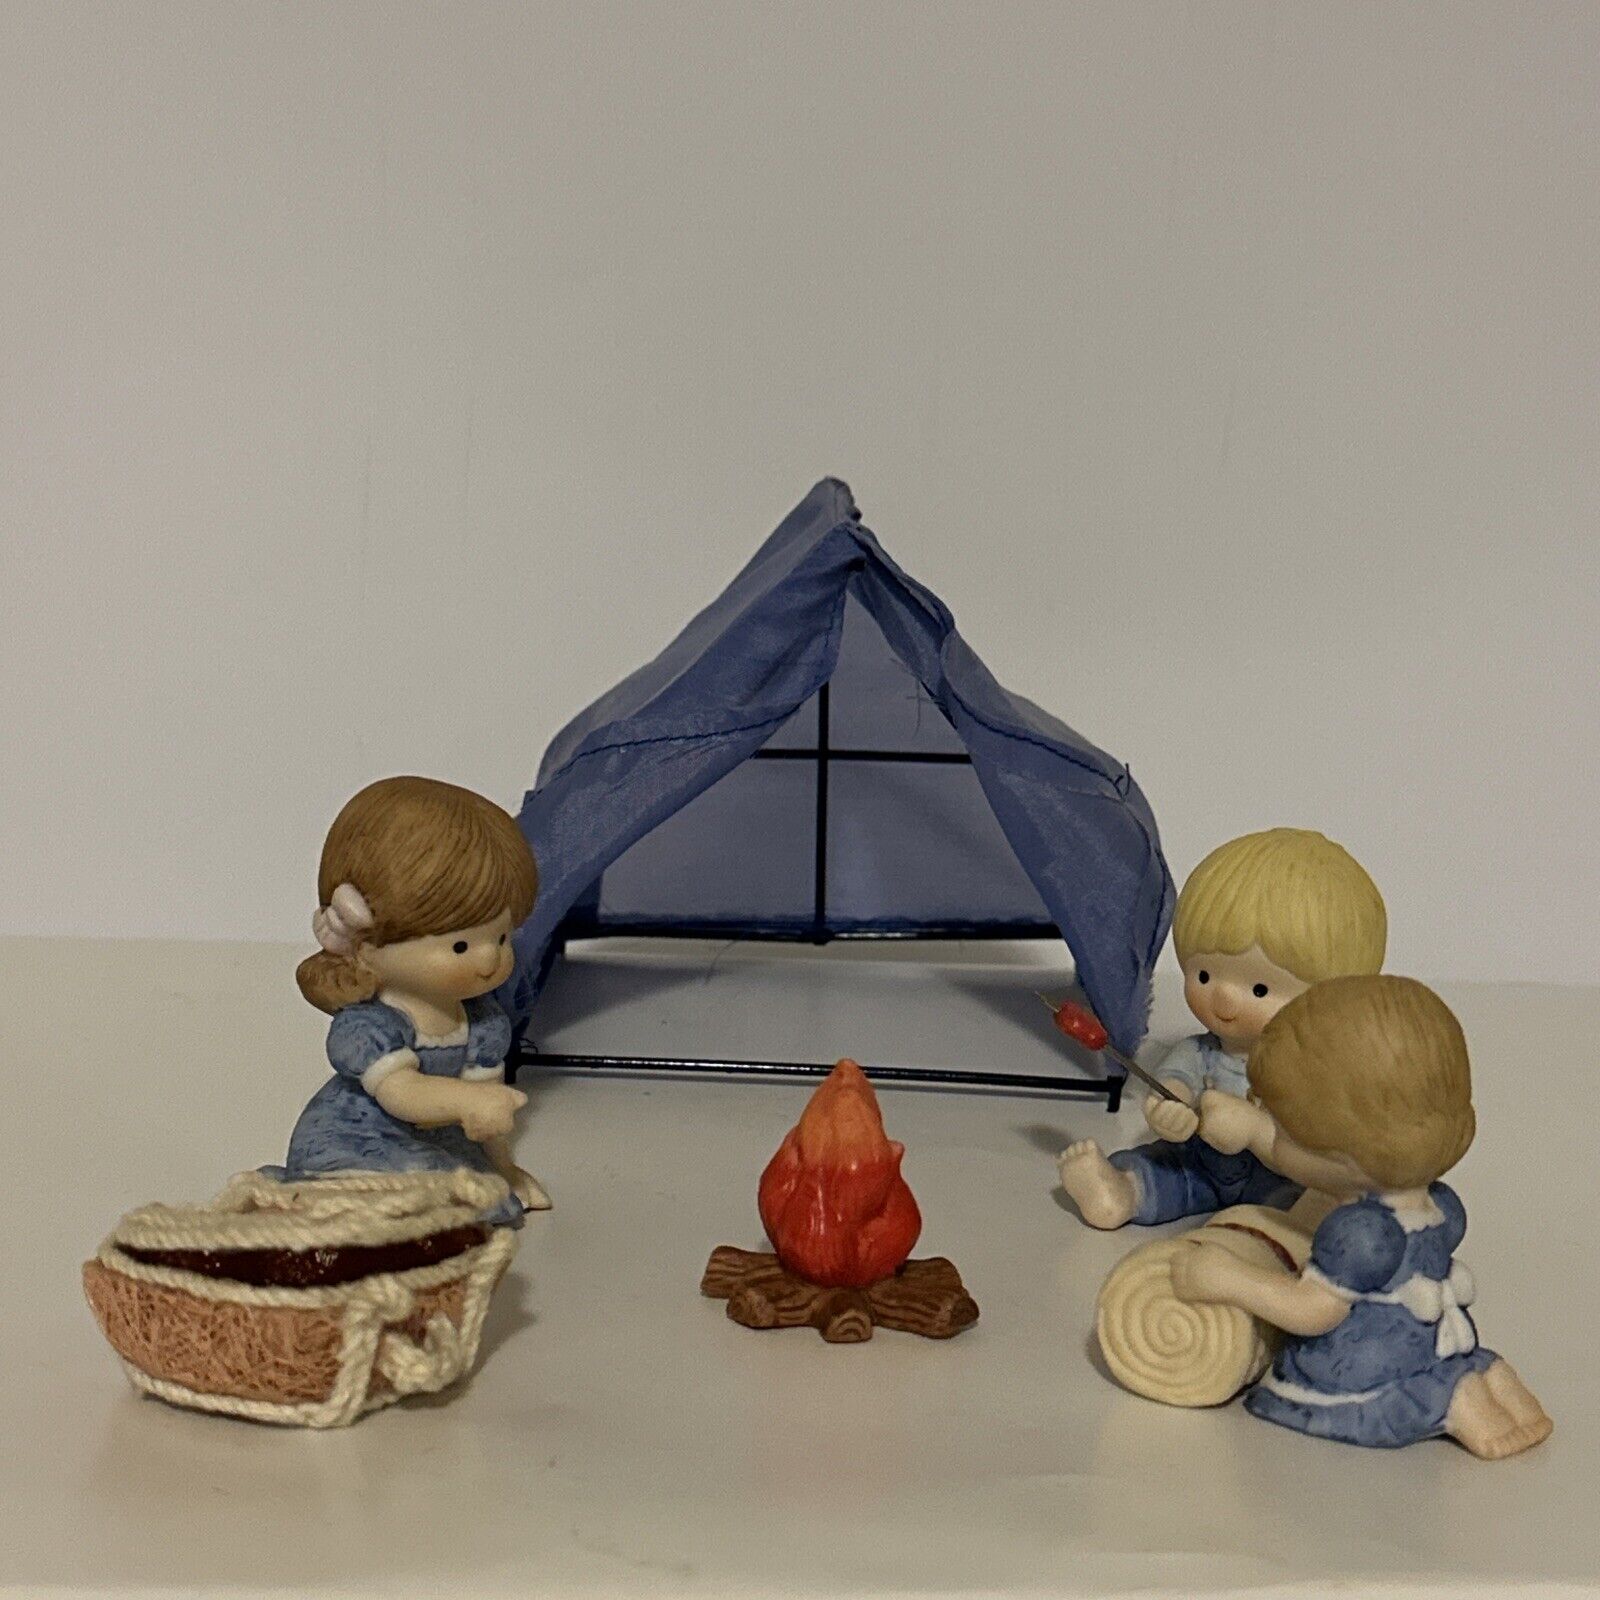 Enesco Country Cousins Figurines Campfire Fire With Tent And Basket